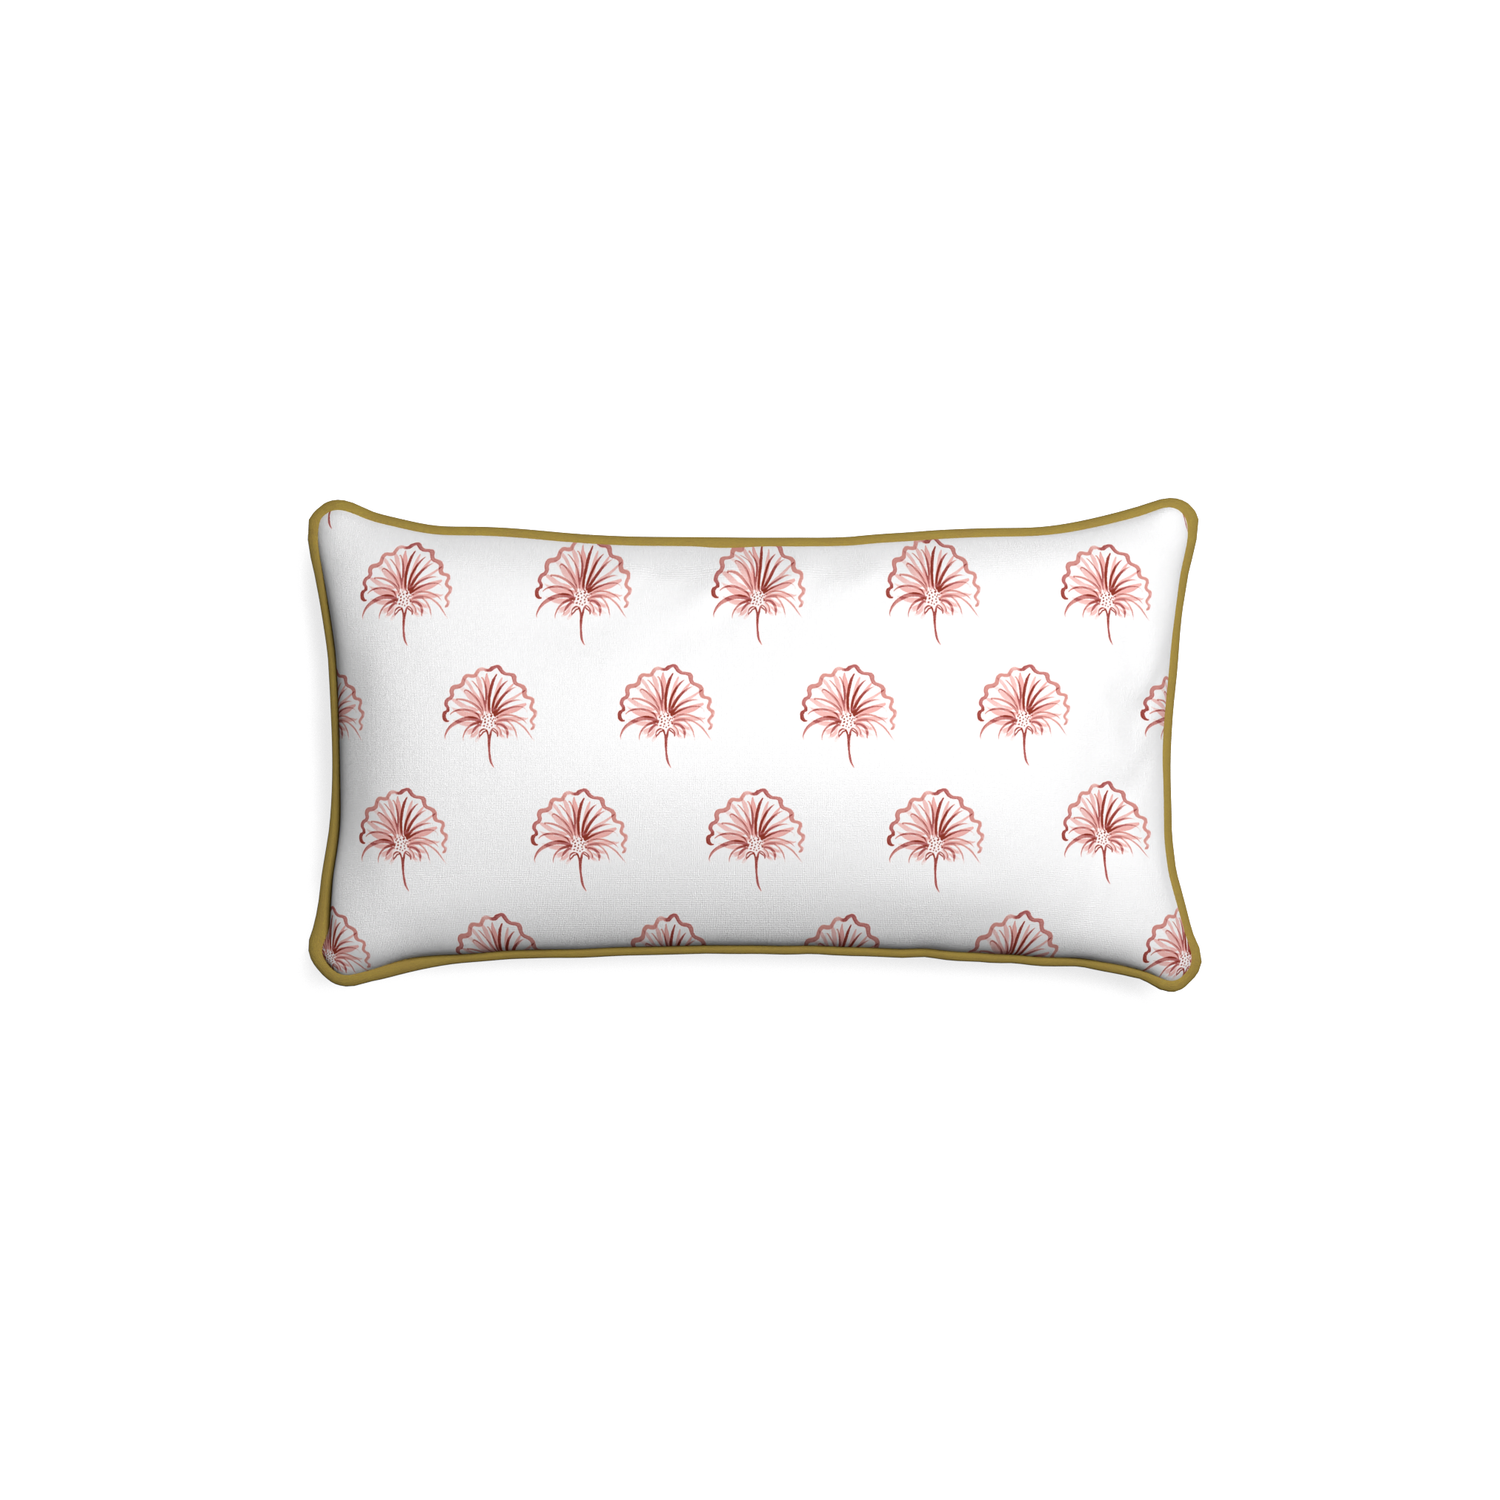 Petite-lumbar penelope rose custom floral pinkpillow with c piping on white background